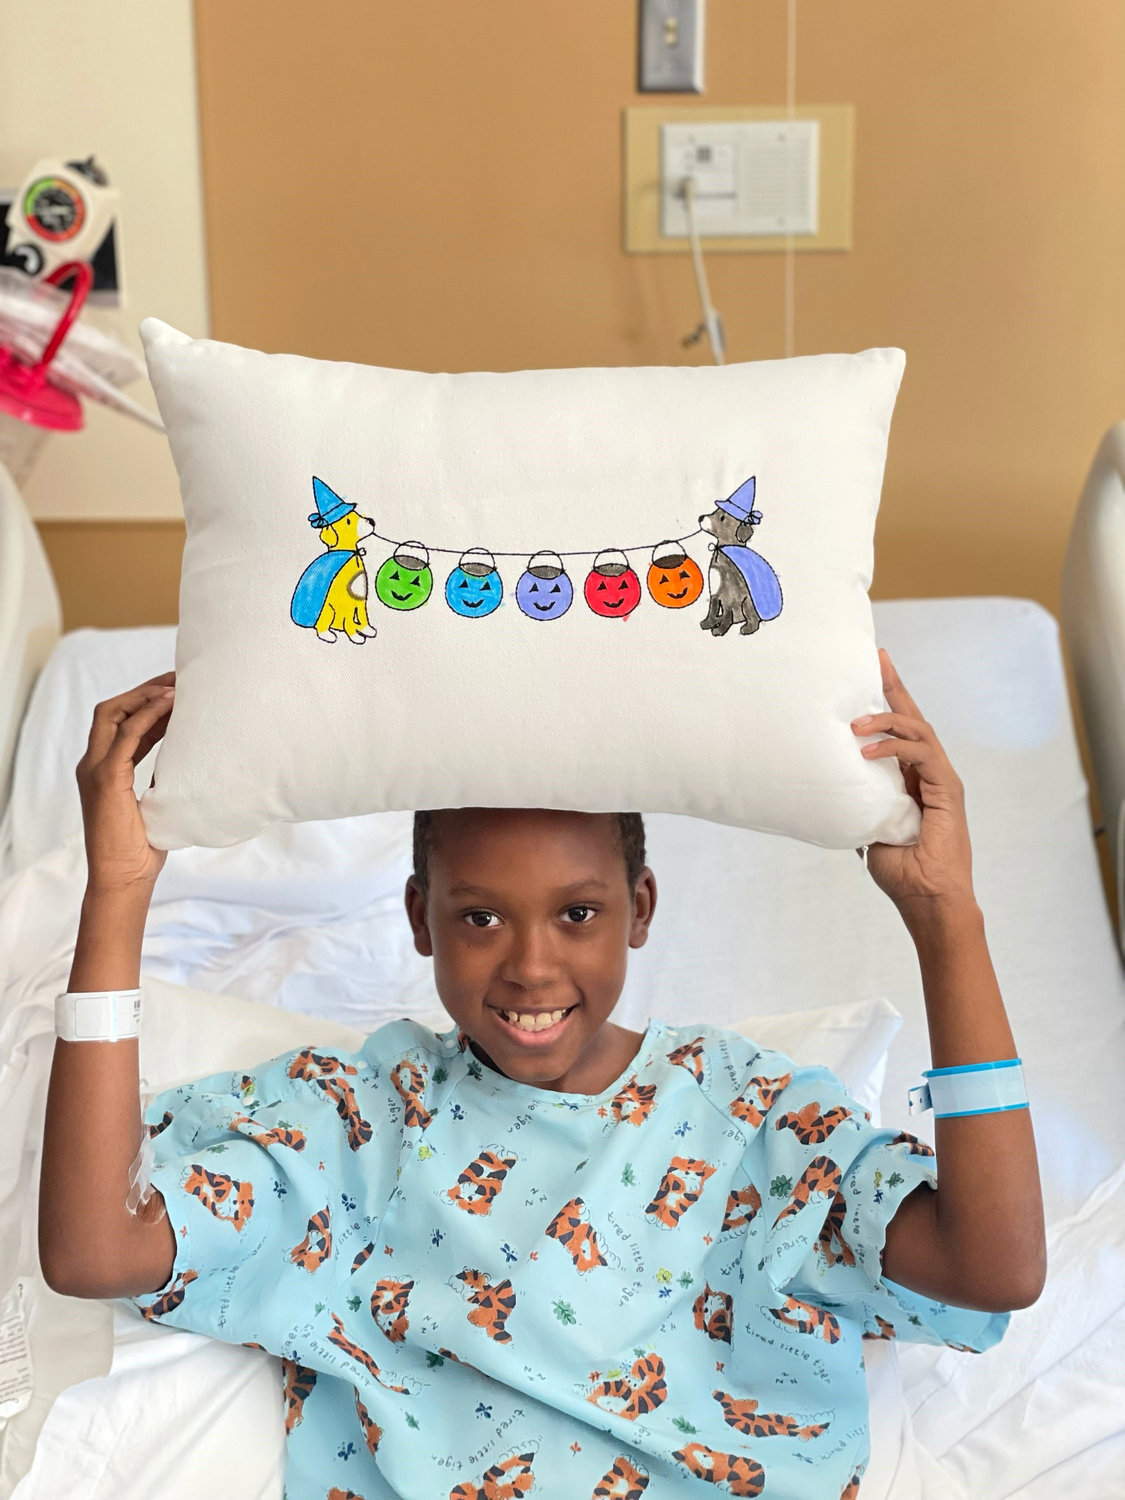 Two years ago, Alex Abbott Spearman of AHA Designs started donating coloring pillows with monograms and designs for the pediatric unit.